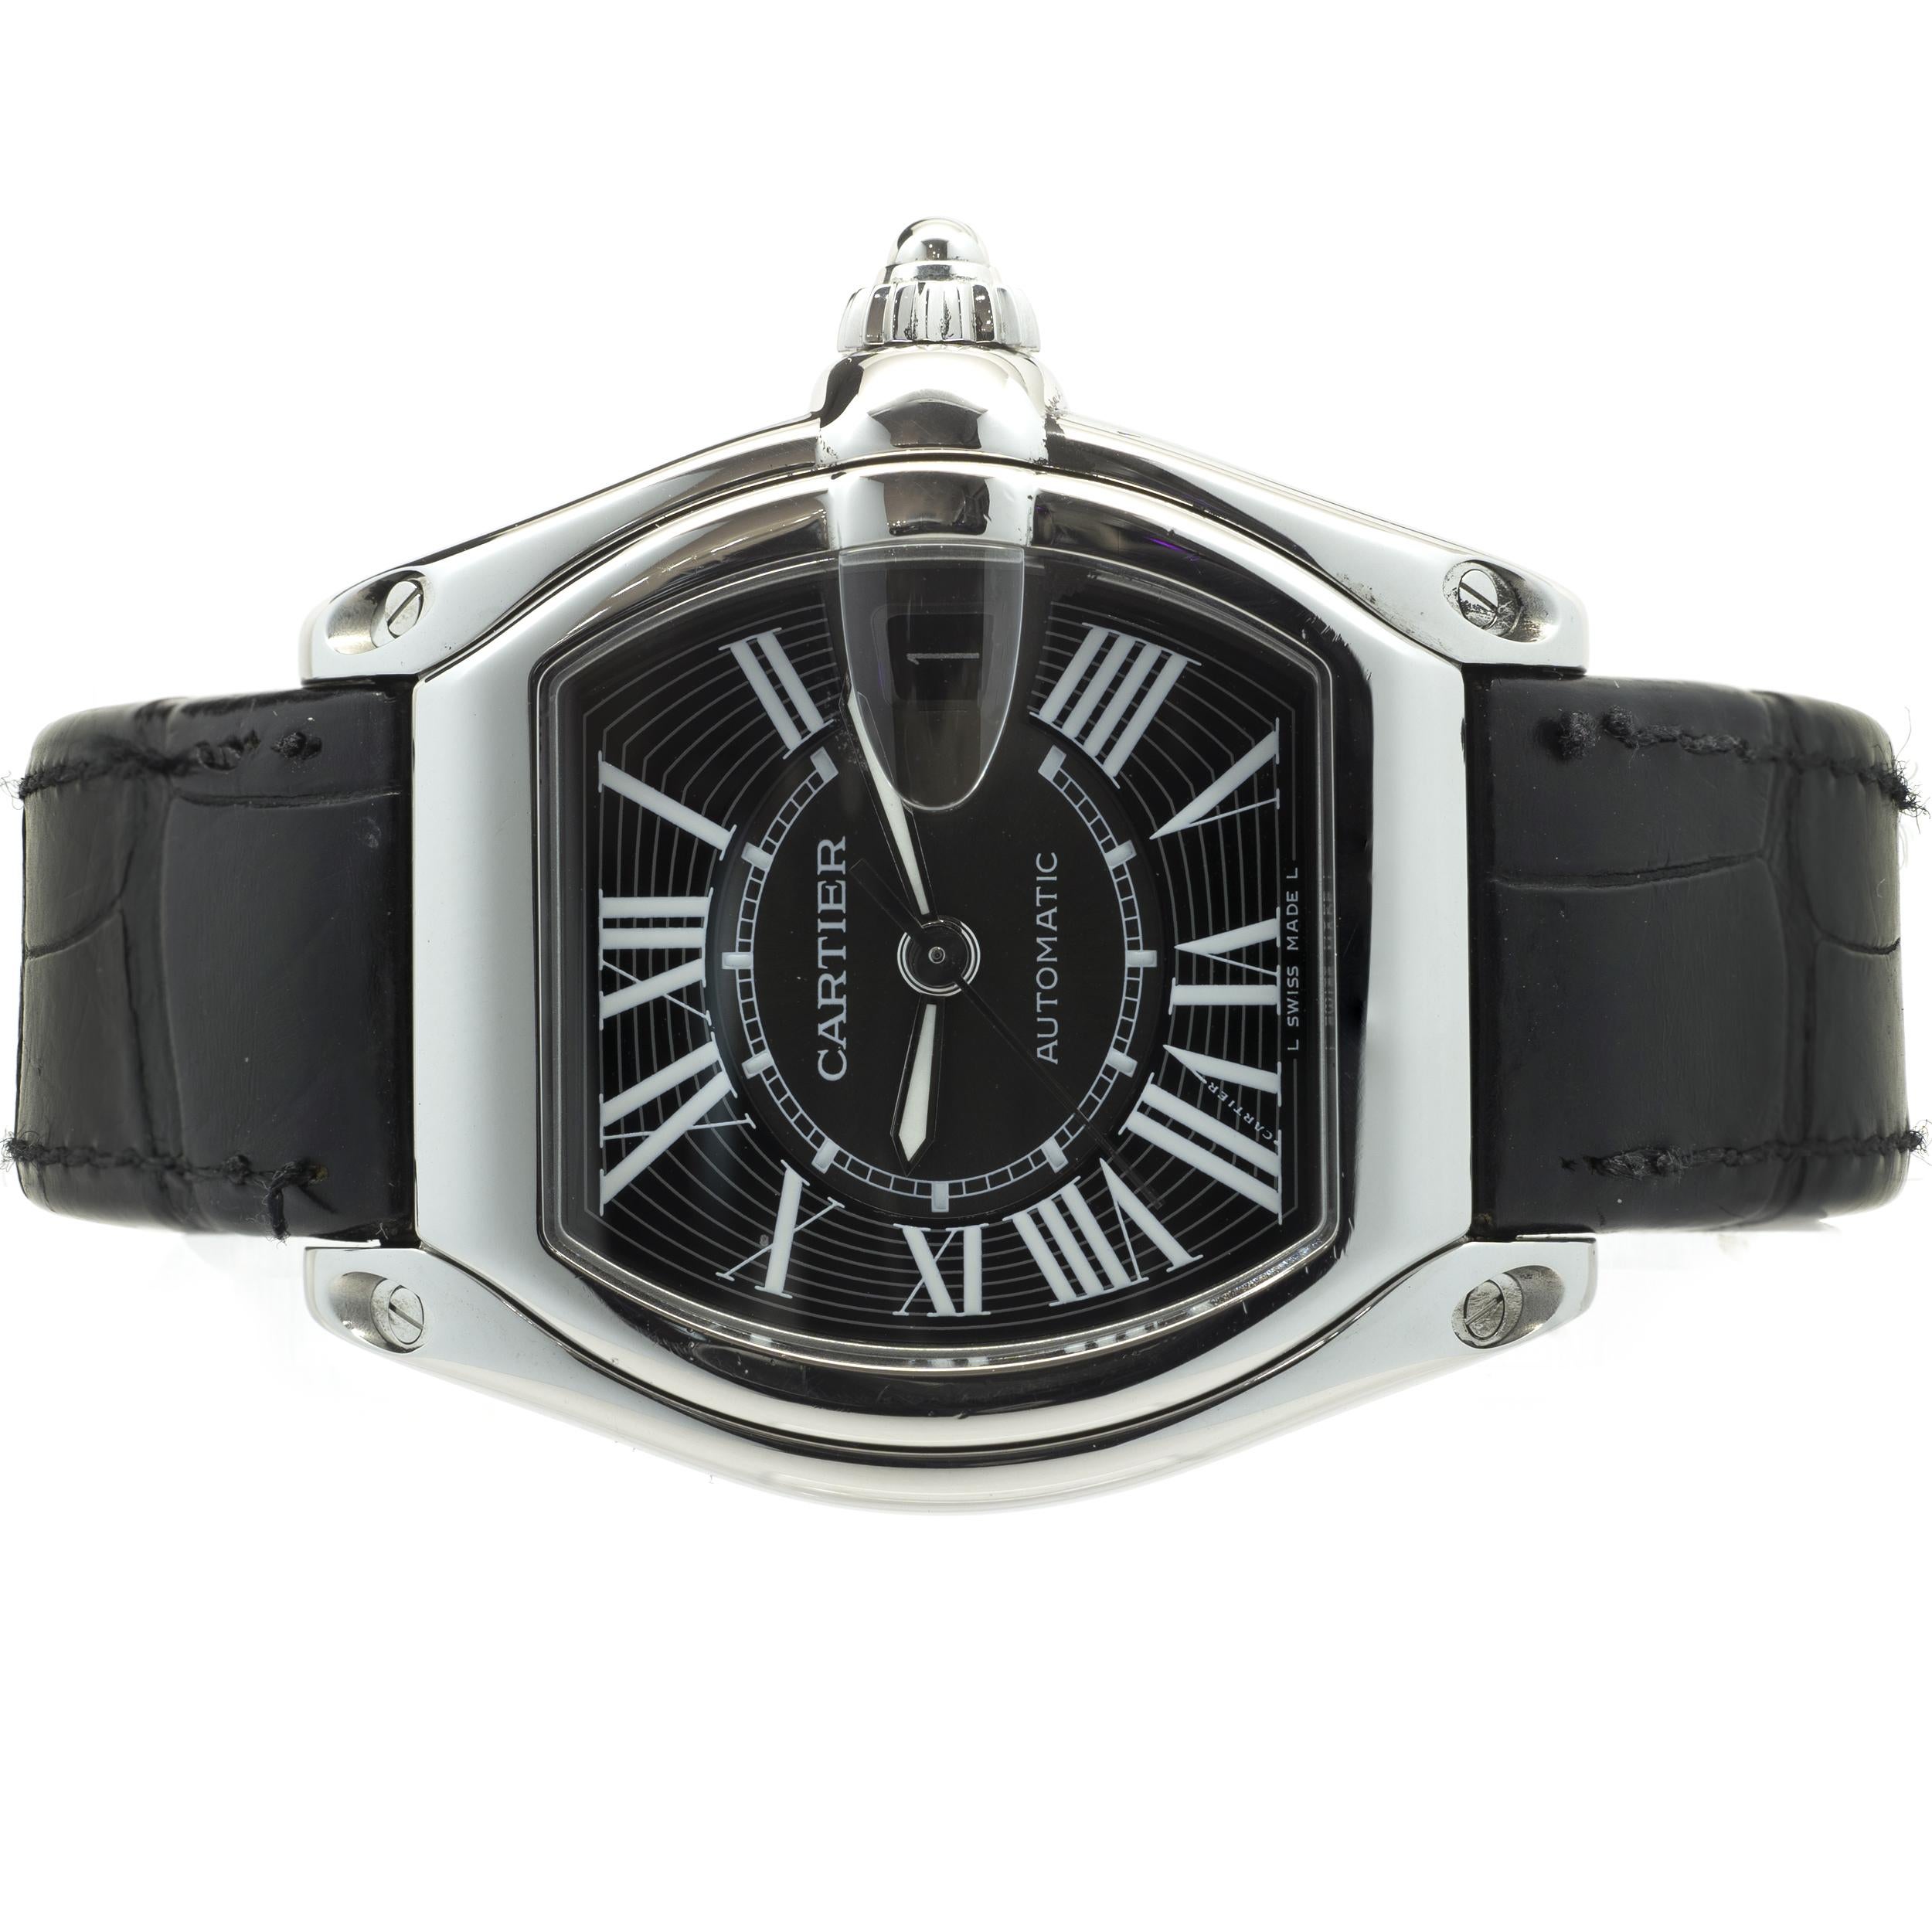 Movement: automatic
Function: hours, minutes
Case: 35mm stainless steel tonneau case, push pull crown, sapphire crystal
Dial: black dial, steel sword sweeping hands
Band: black Cartier crocodile strap, fold over clasp
Serial #: 57997XXX
Reference #: